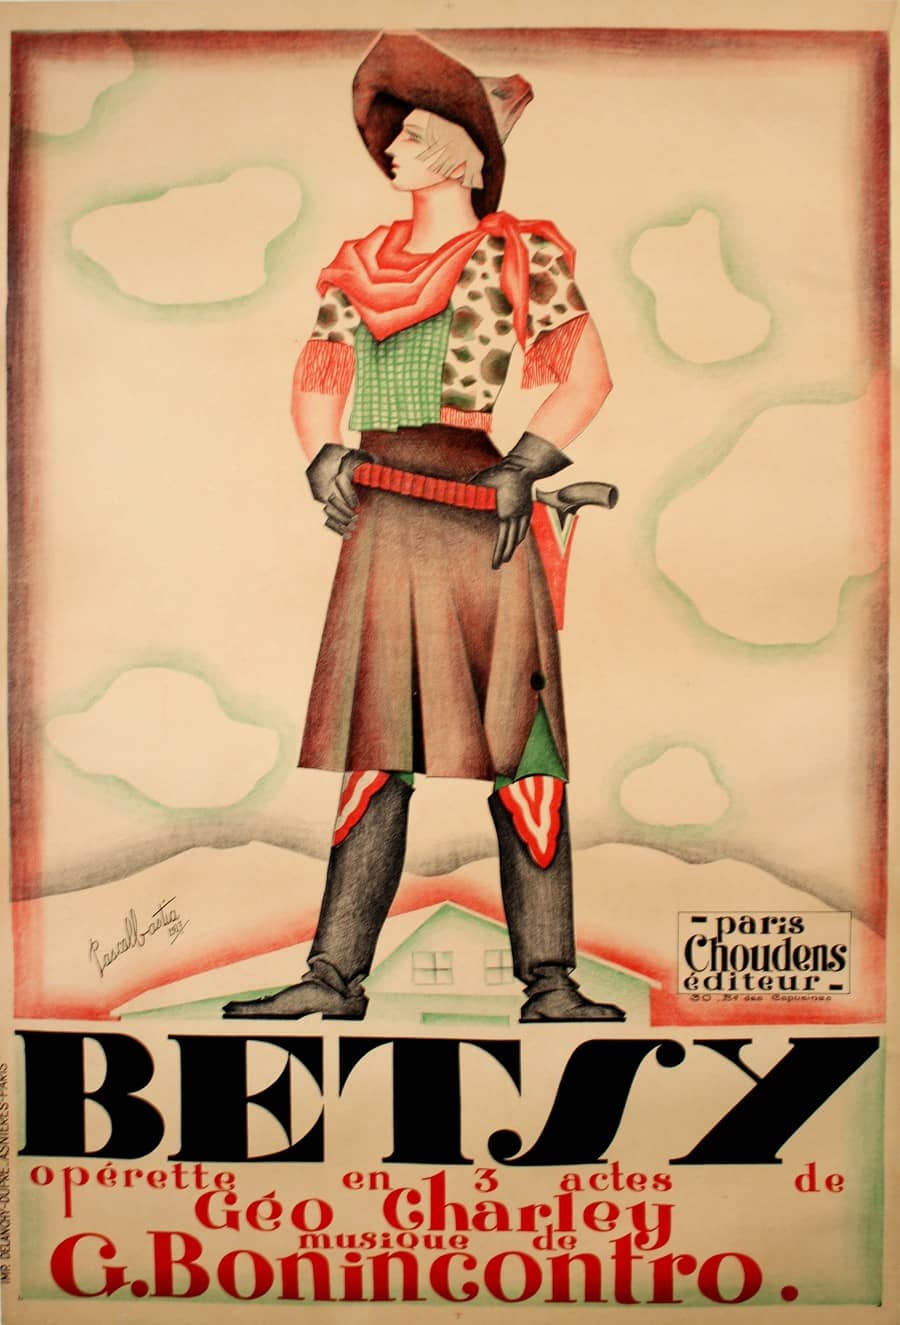 Betsy Operetta Vintage Poster by Bastia 1927 Original French Featuring Cowgirl